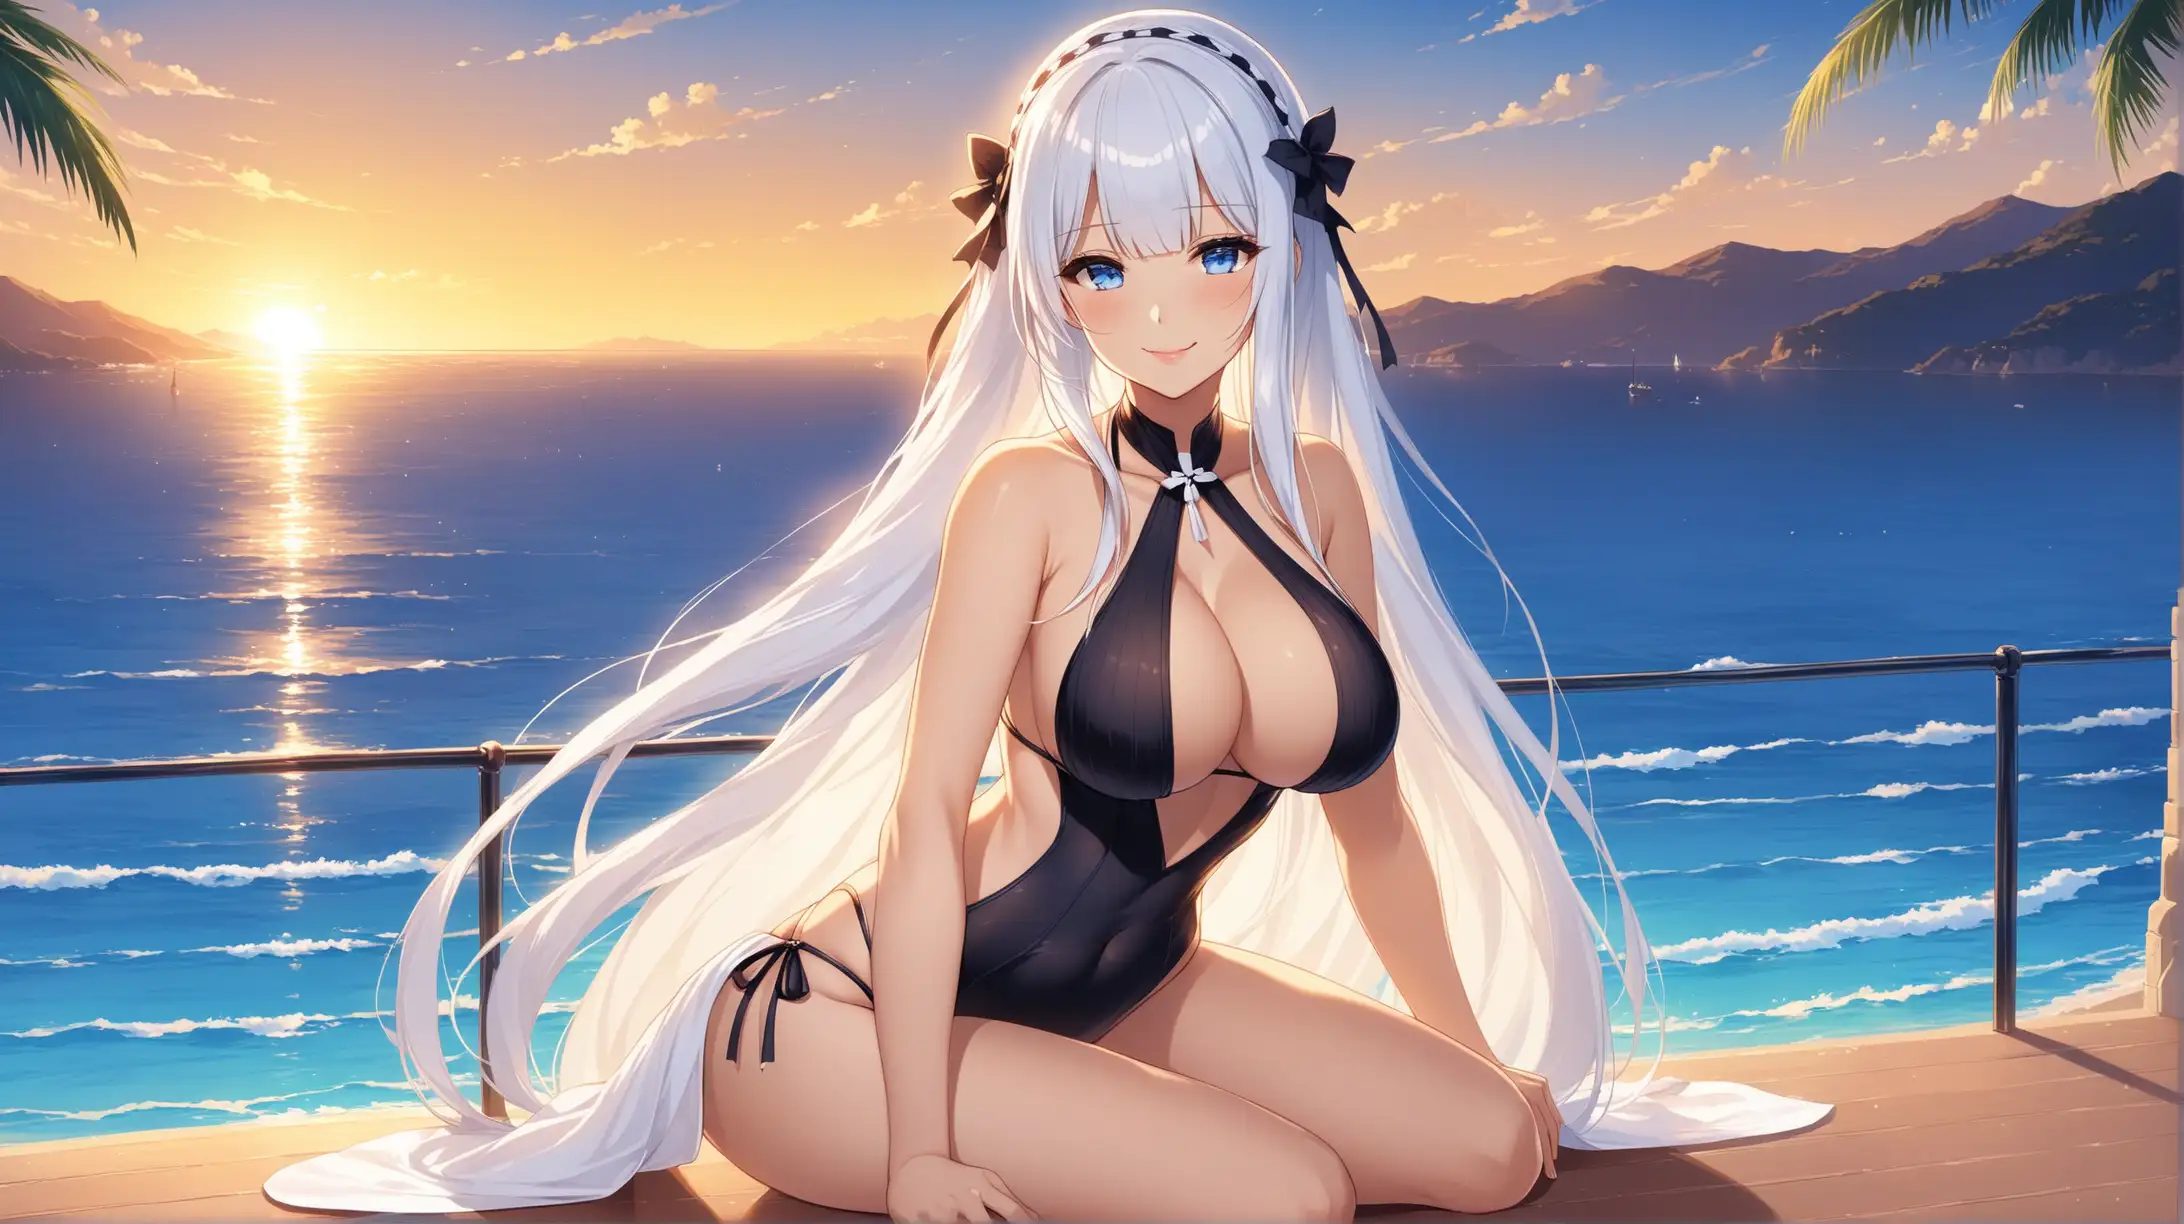 Draw the character Illustrious from Azur Lane, blue eyes, high quality, ambient lighting, long shot, outdoors, seductive pose, swimsuit, smiling at the viewer